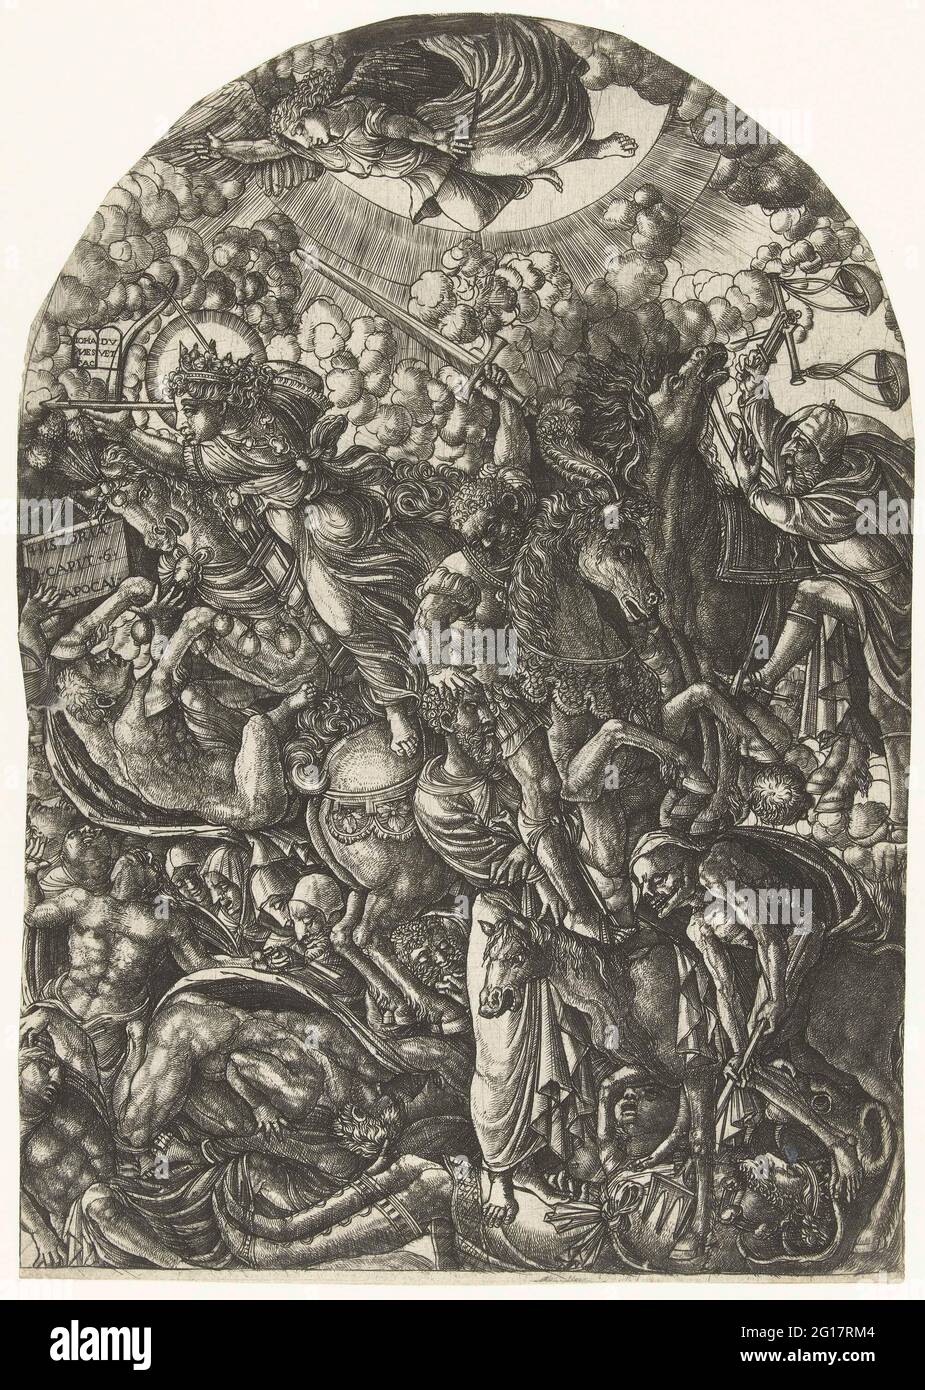 Four riders from the apocalypse; Revelation. The four riders from the Apocalypse: victory with crown and arrow and bow, war with a raised sword, hungry waves with a scales and death with a trident. They trample people. Fourded from a series of 23 with John's revelations. Stock Photo